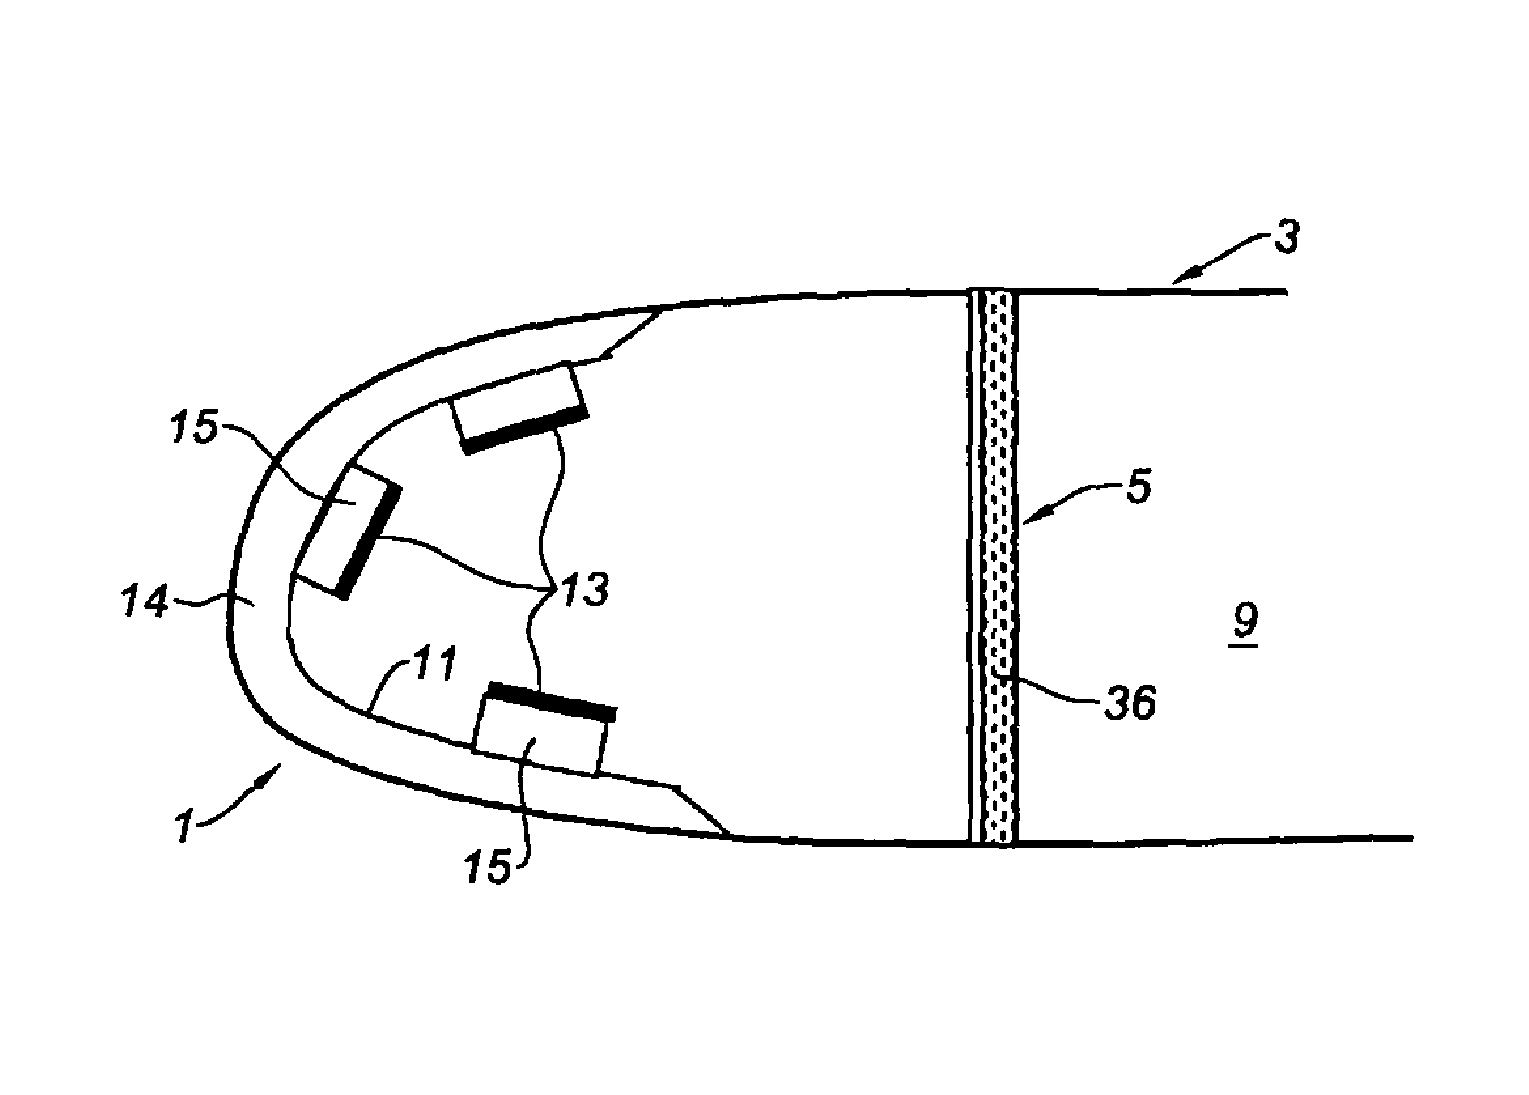 De-icing and/or anti-icing system for the leading edge of an aircraft wing